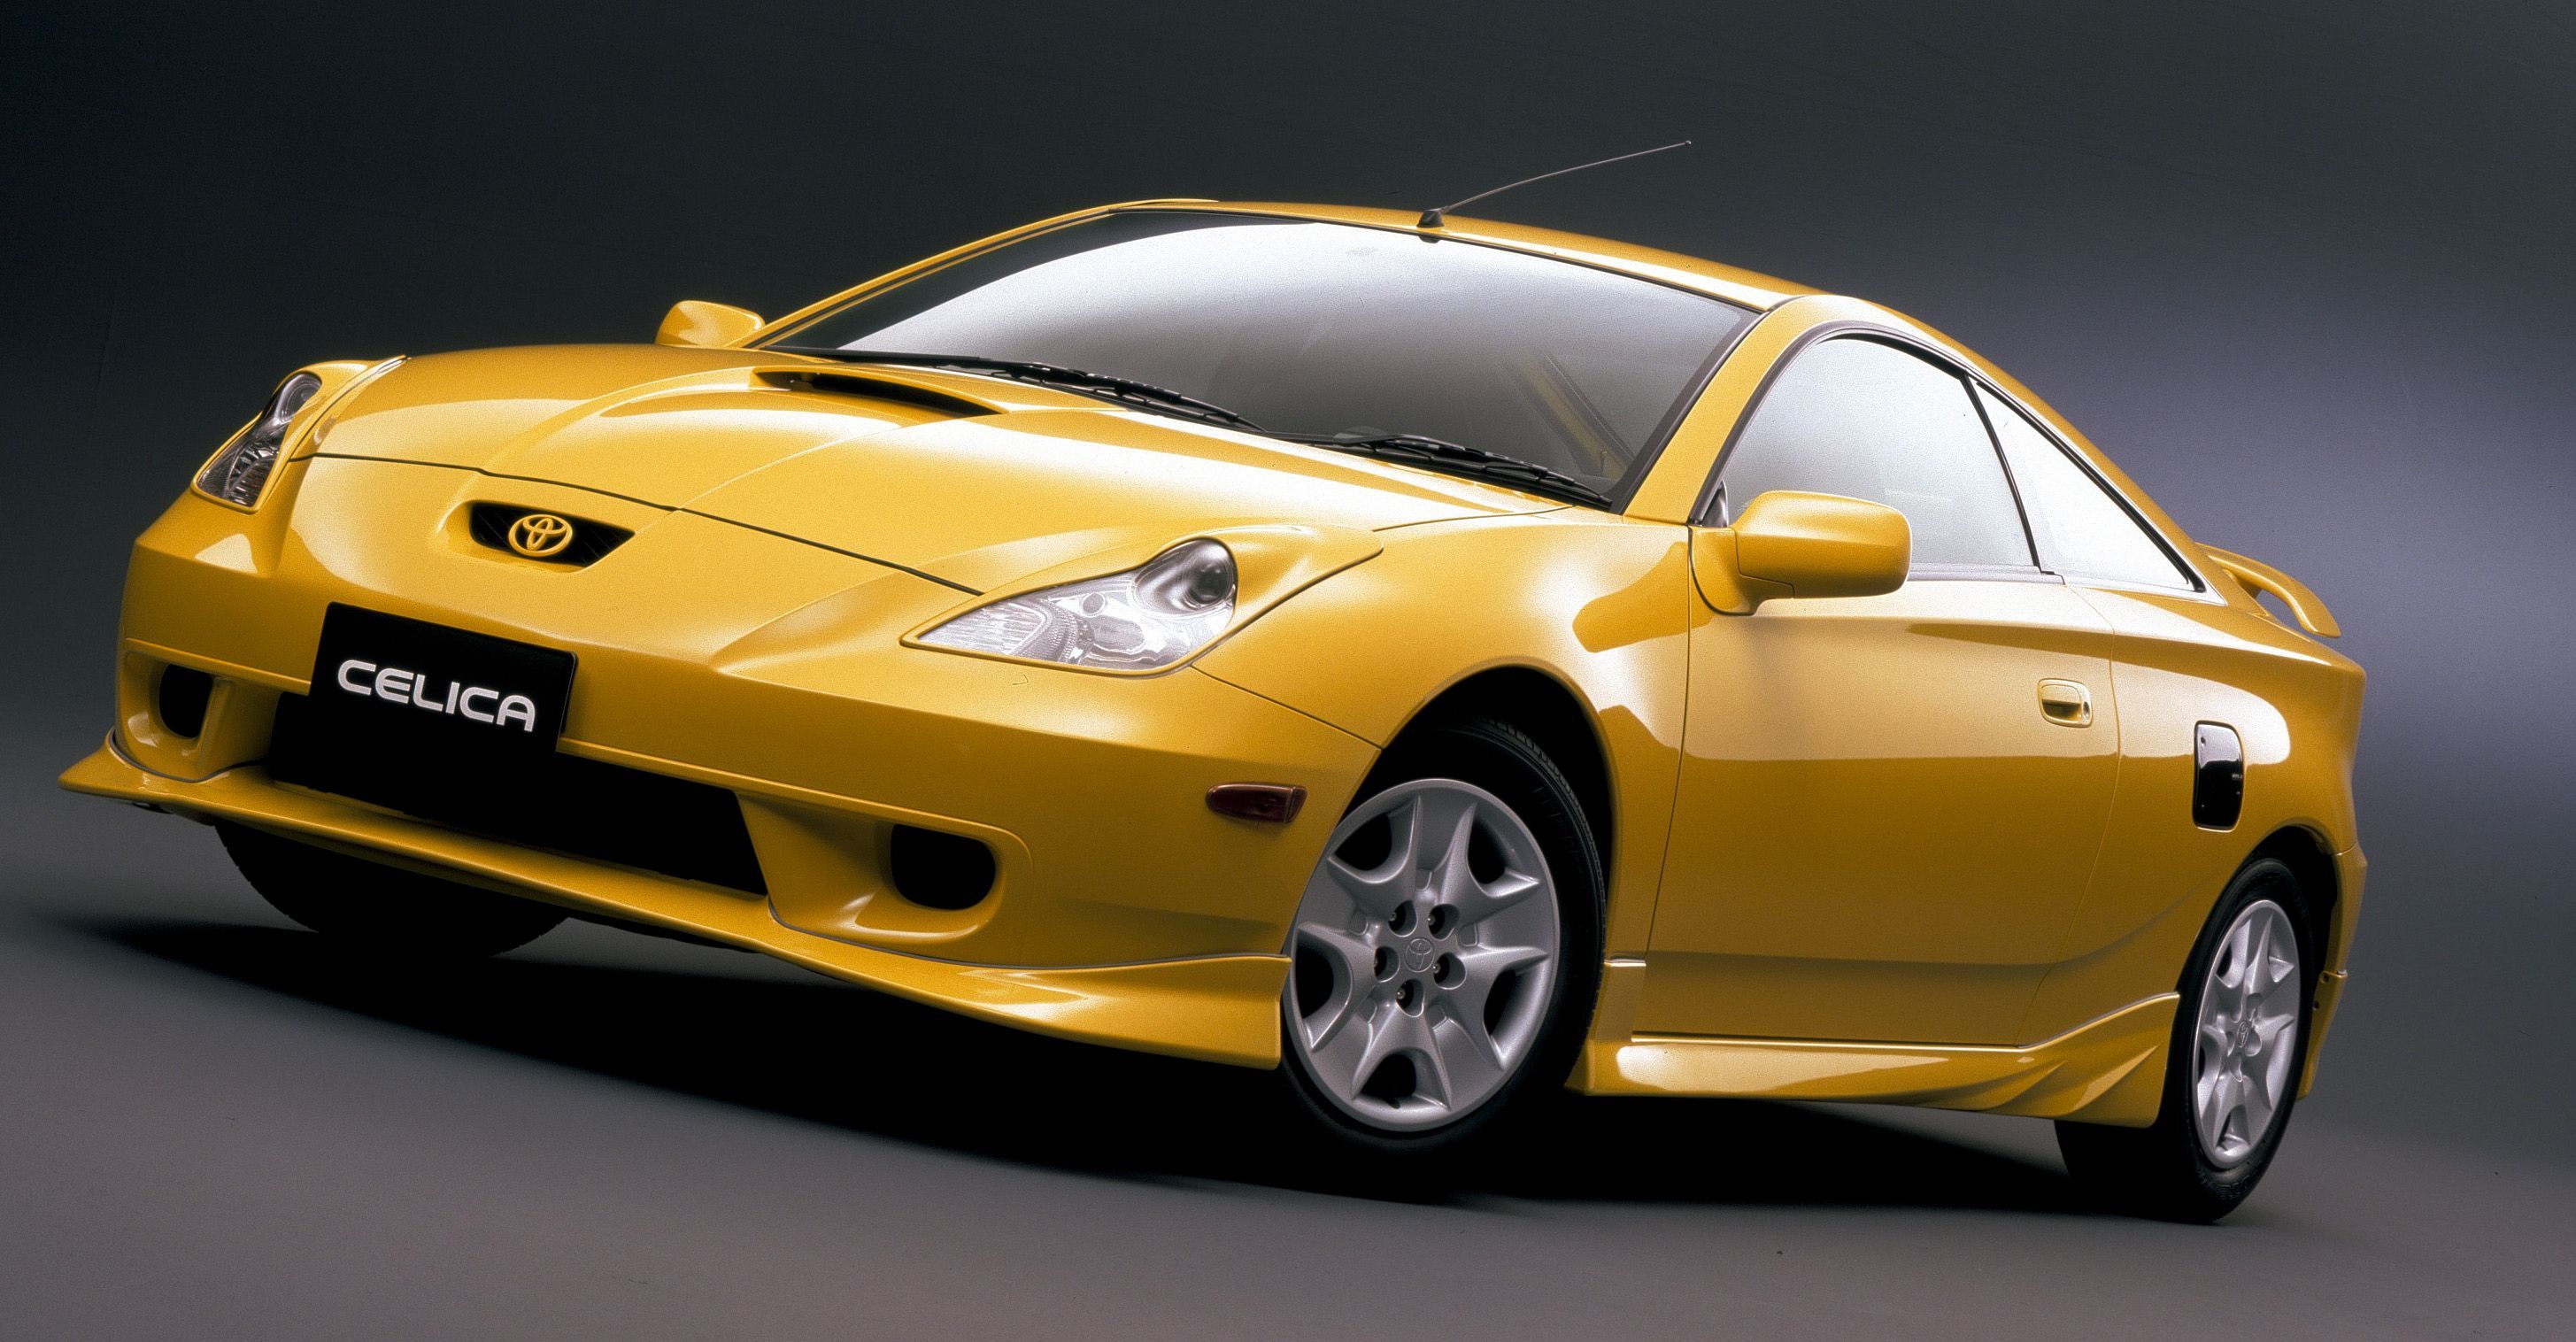 Pictures Of Best Cars Best+cars+in+the+world3 - Cars Backgrounds ...